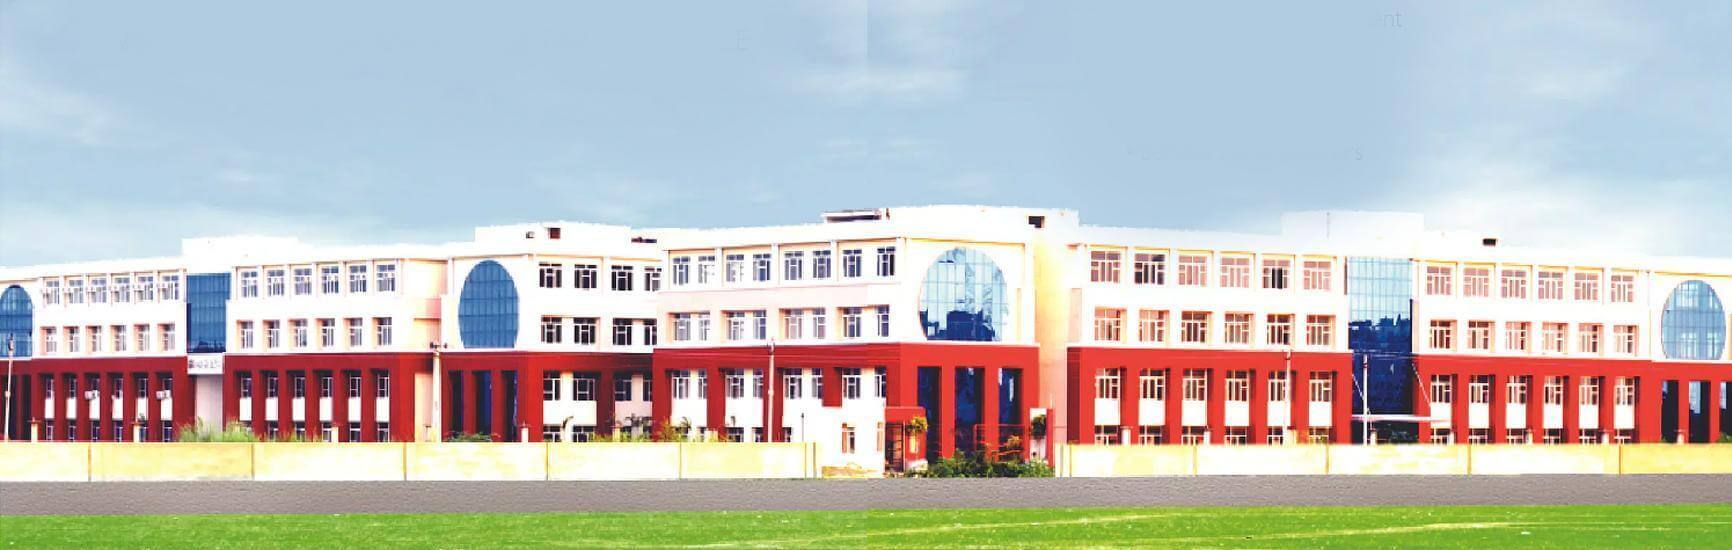 global institute of technology2nd img 1